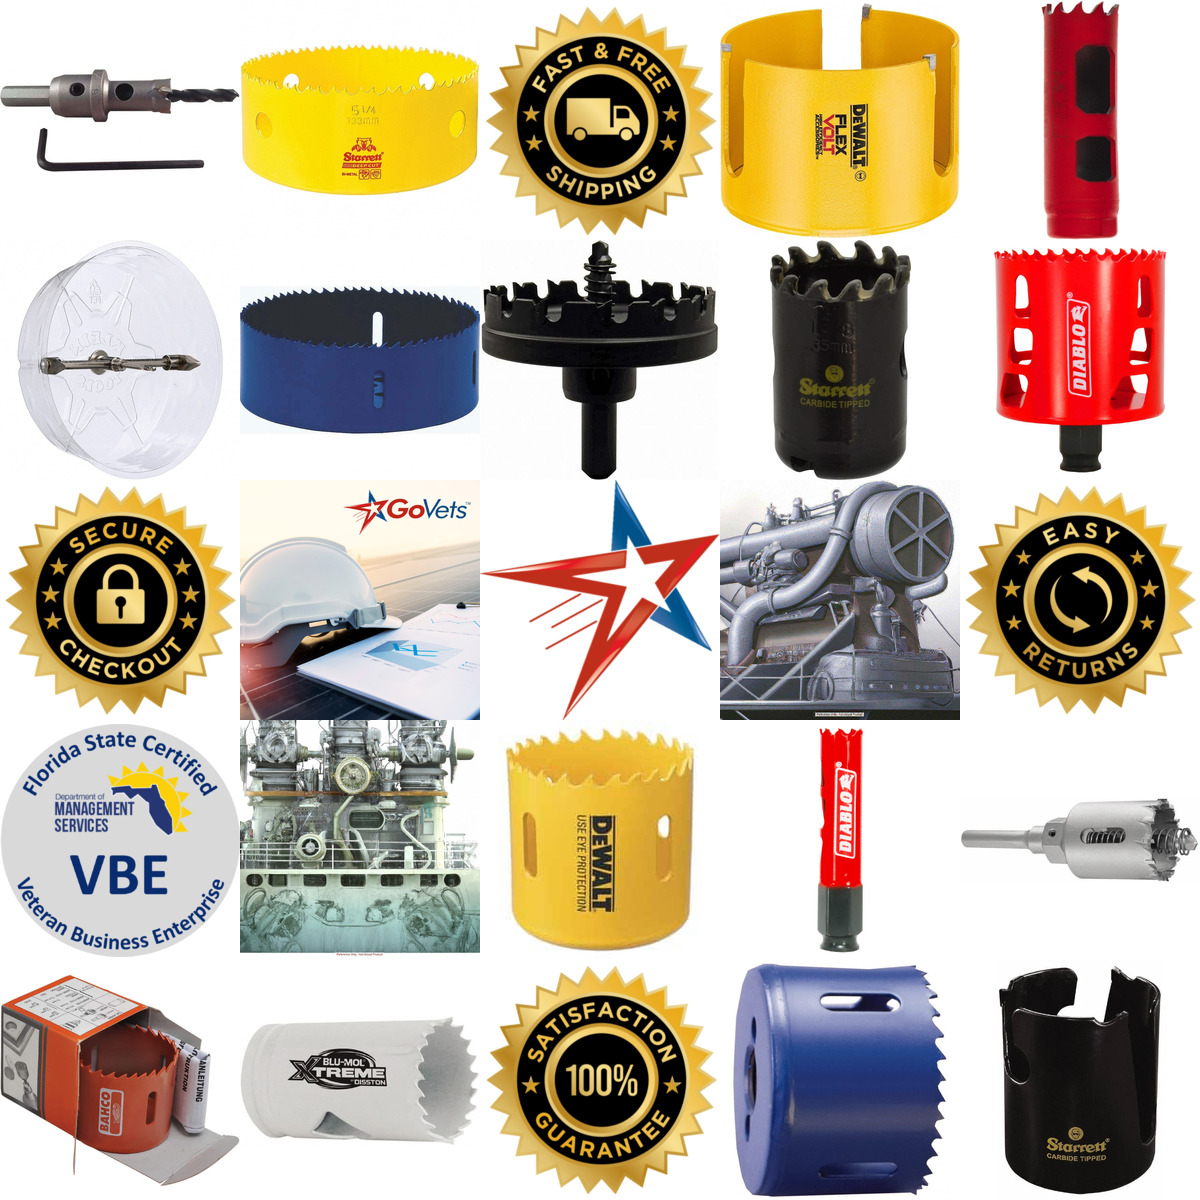 A selection of Hole Saws products on GoVets